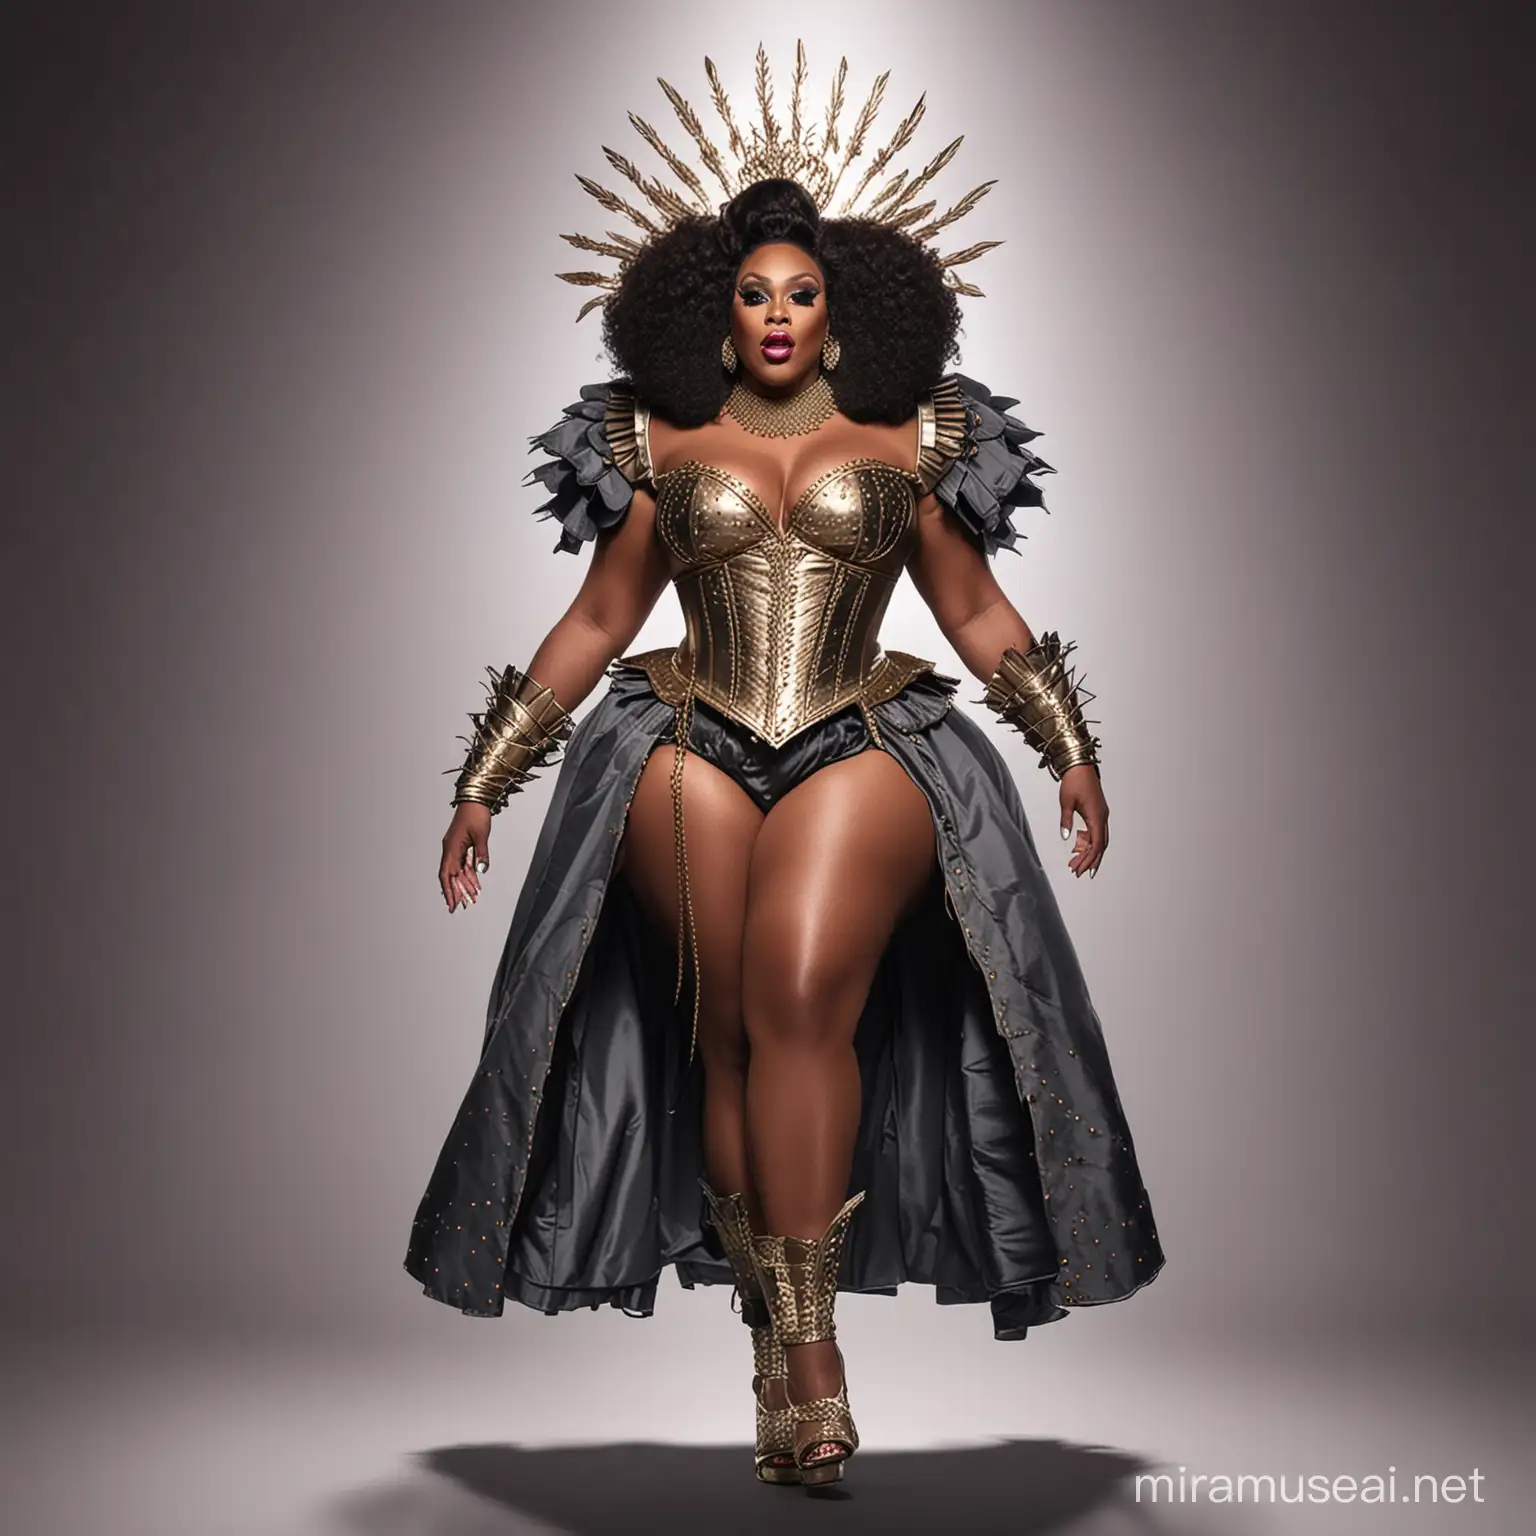 a full body image of a fat african american medieval inspired drag queen walking on the Rupaul's Drag race runway wearing an outfit inspired by the prompt: ready for war 